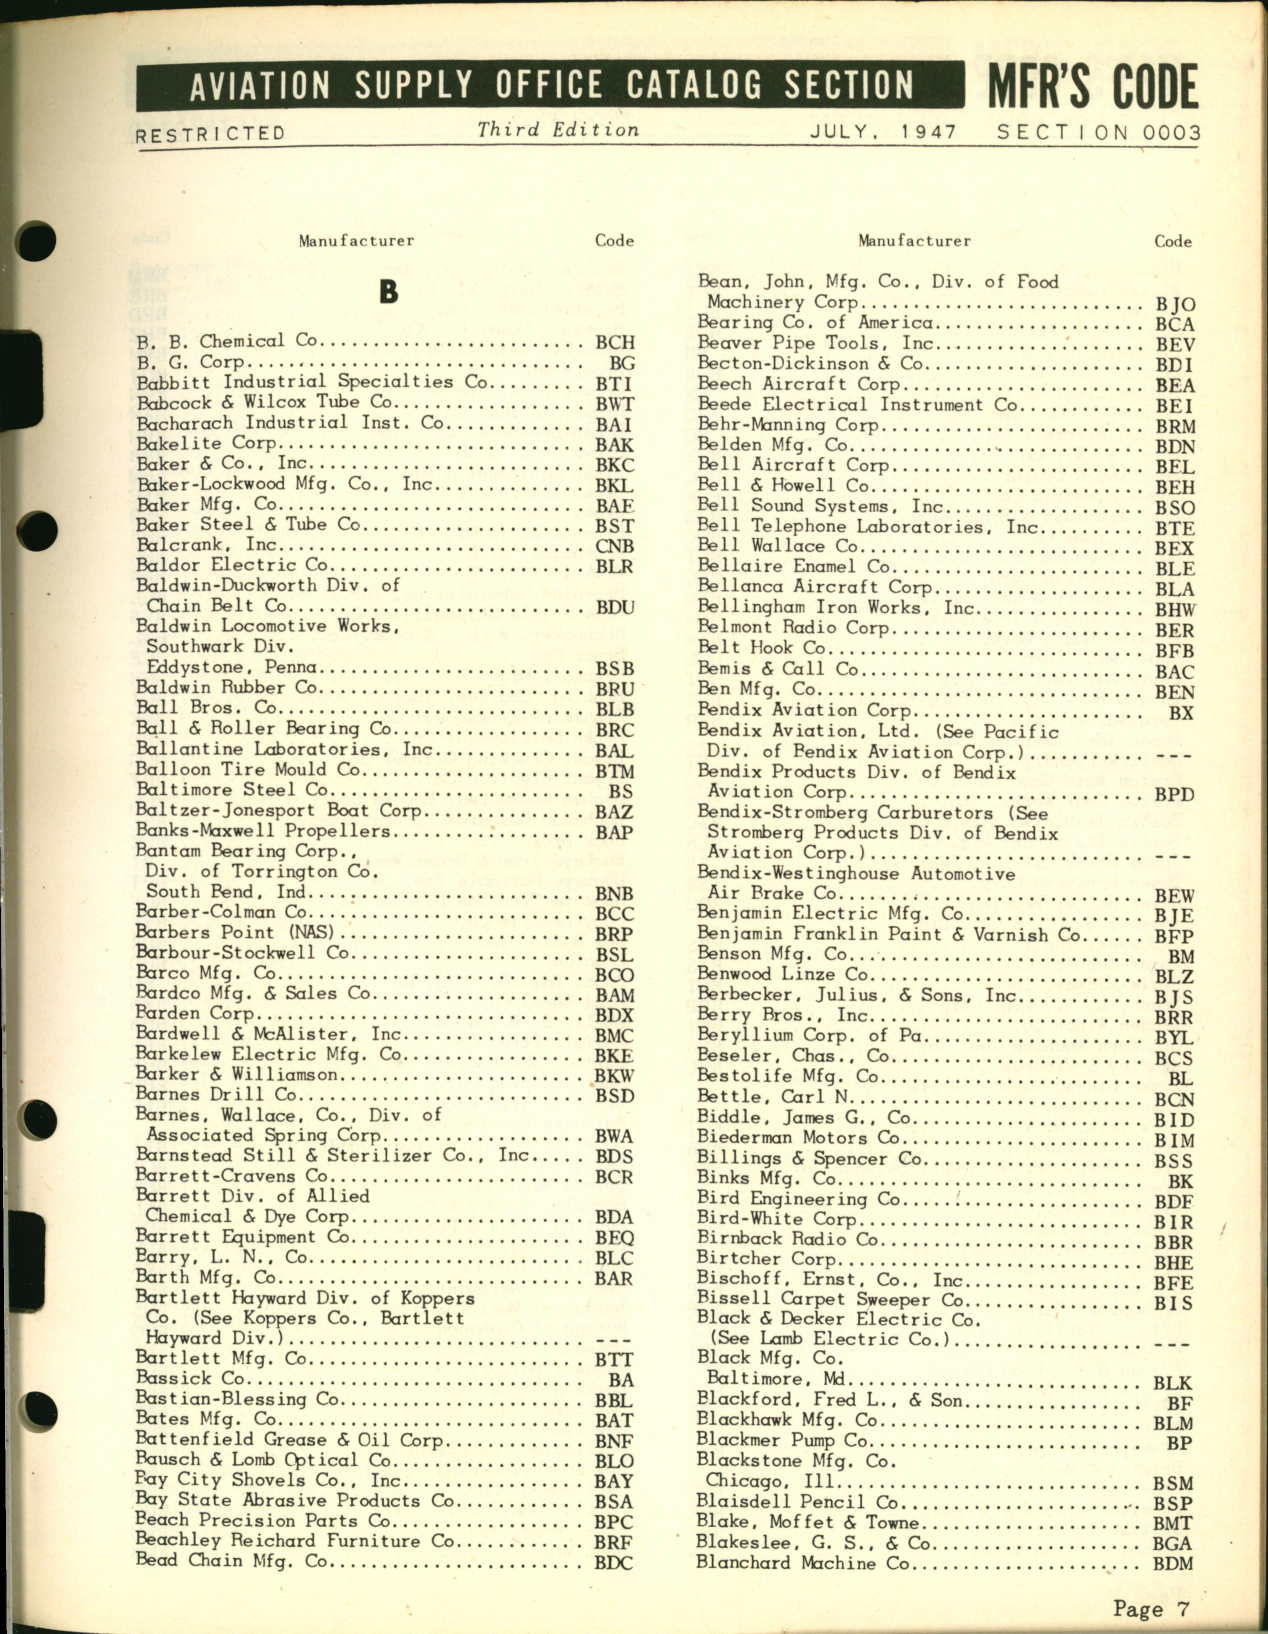 Sample page 7 from AirCorps Library document: Name of Code Index of Manufacturers of Aeronautical Material